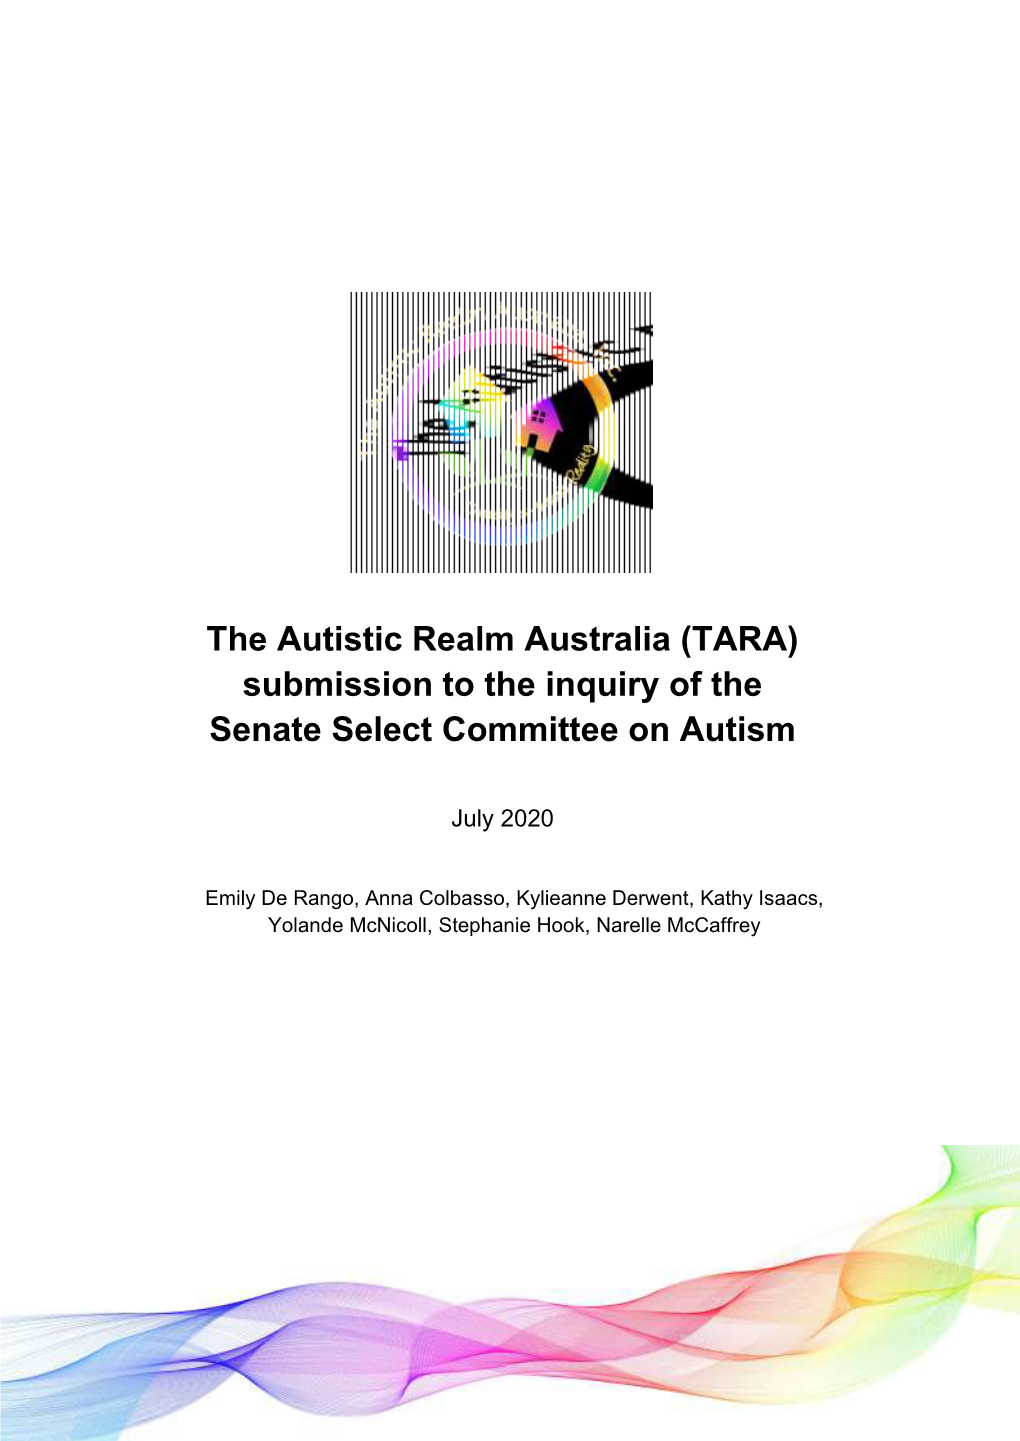 Submission to the Inquiry of the Senate Select Committee on Autism